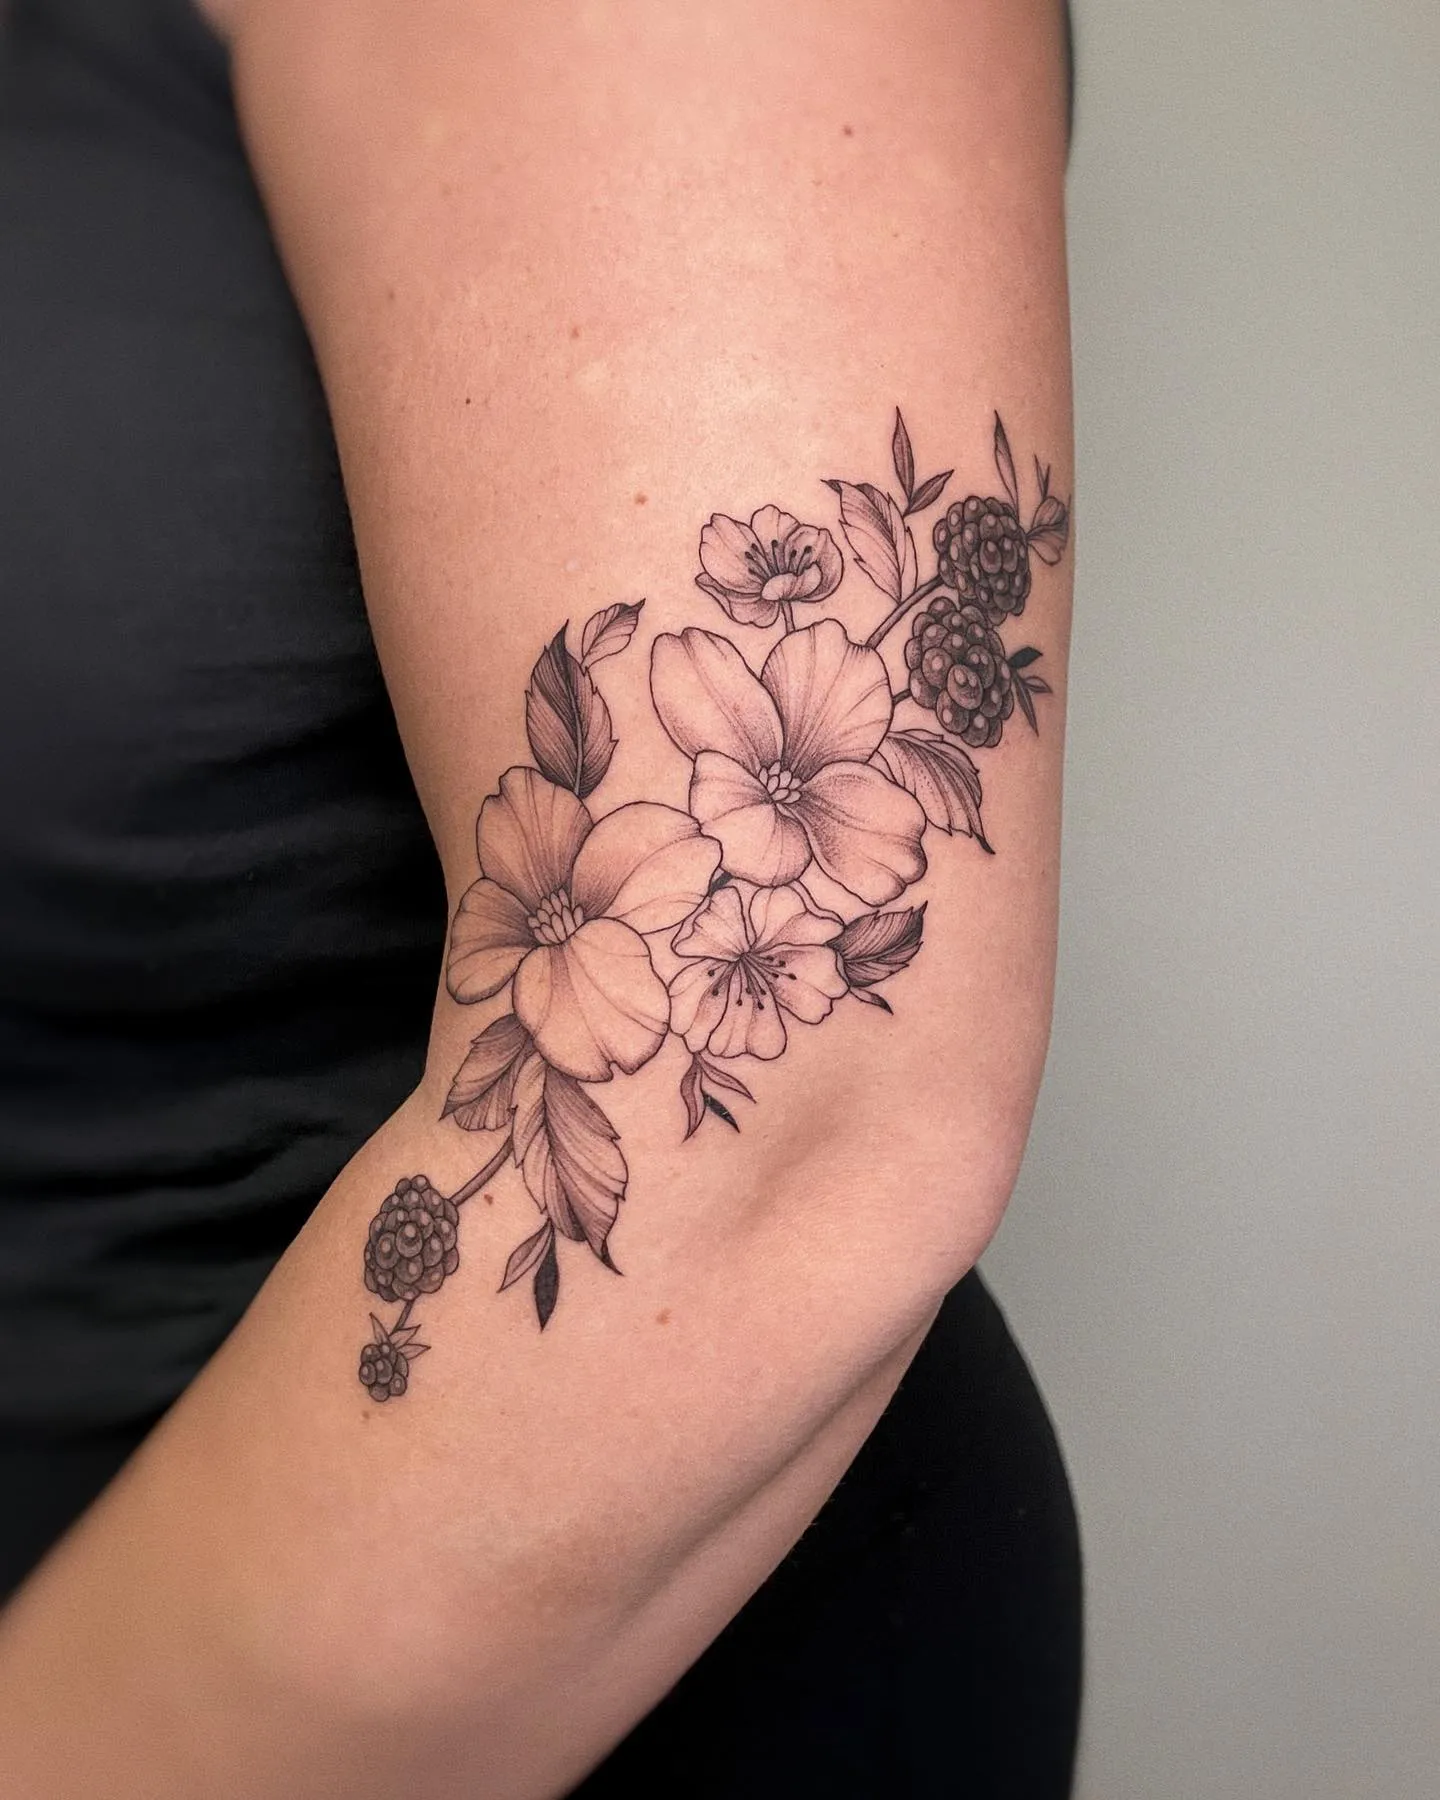 Blackberry Branch Outline Tattoo on Arm